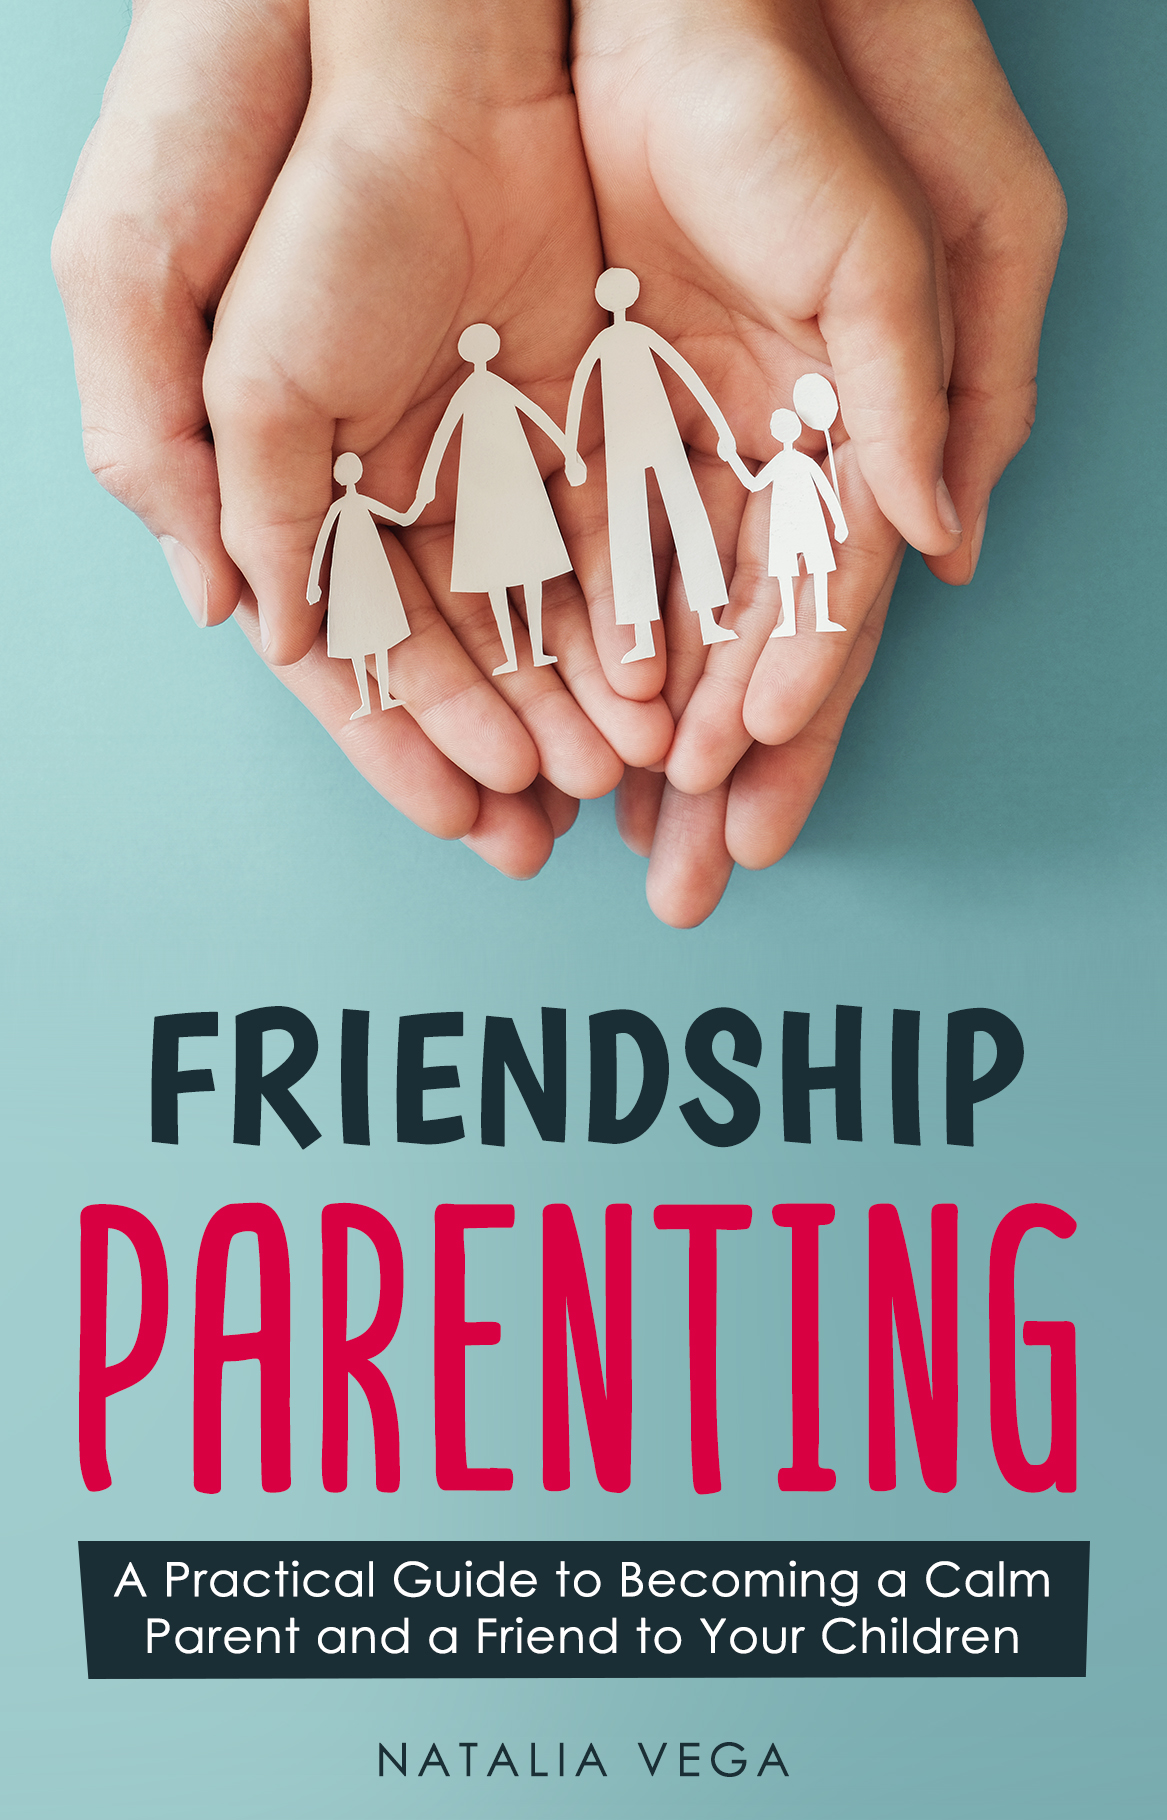 FREE: Friendship Parenting A Practical Guide to Becoming a Calm Parent and a Friend to Your Children by Natalia Vega